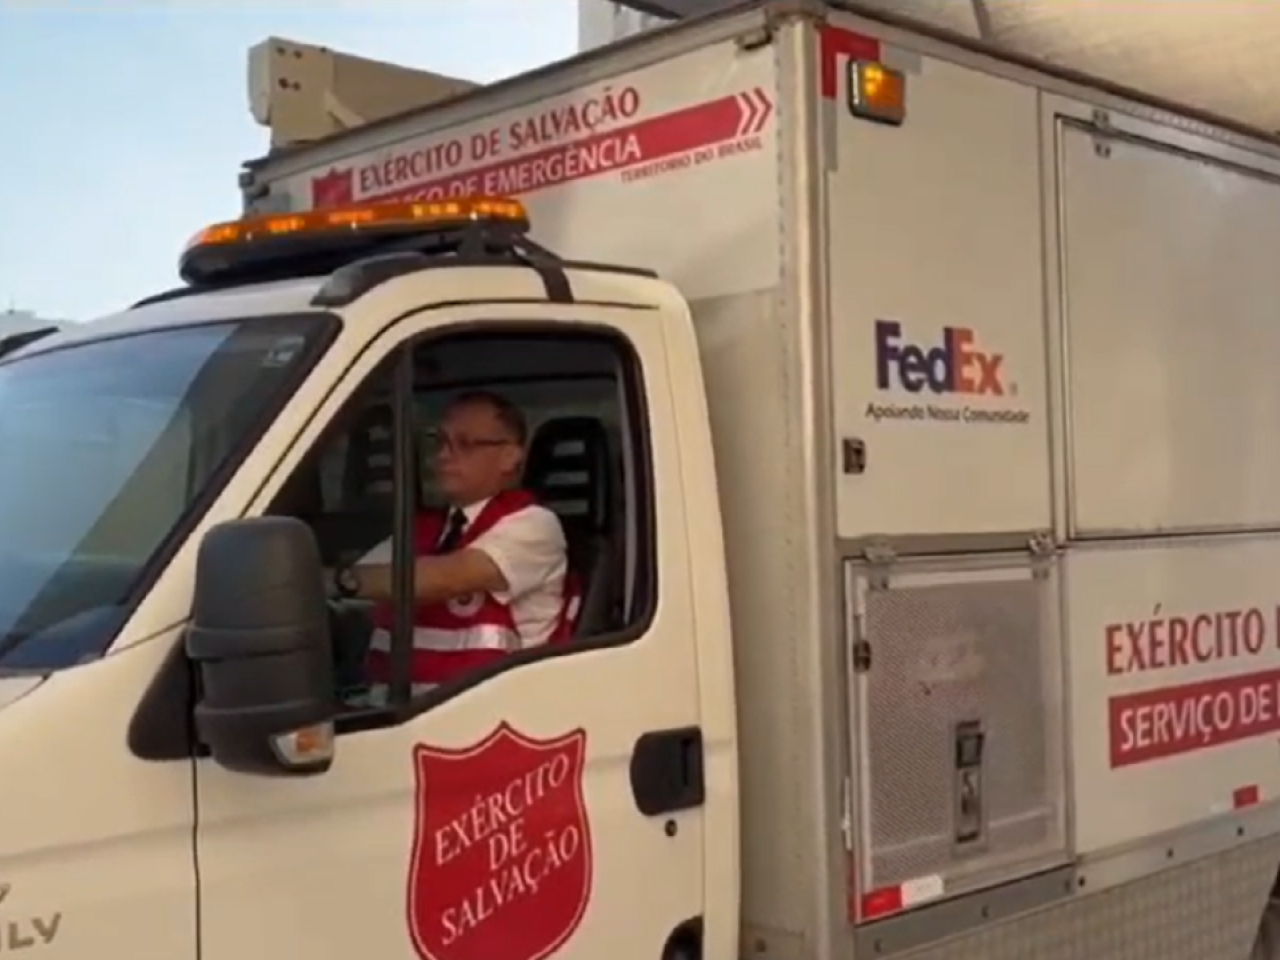 A person driving a Salvation Army FedEx vehicle